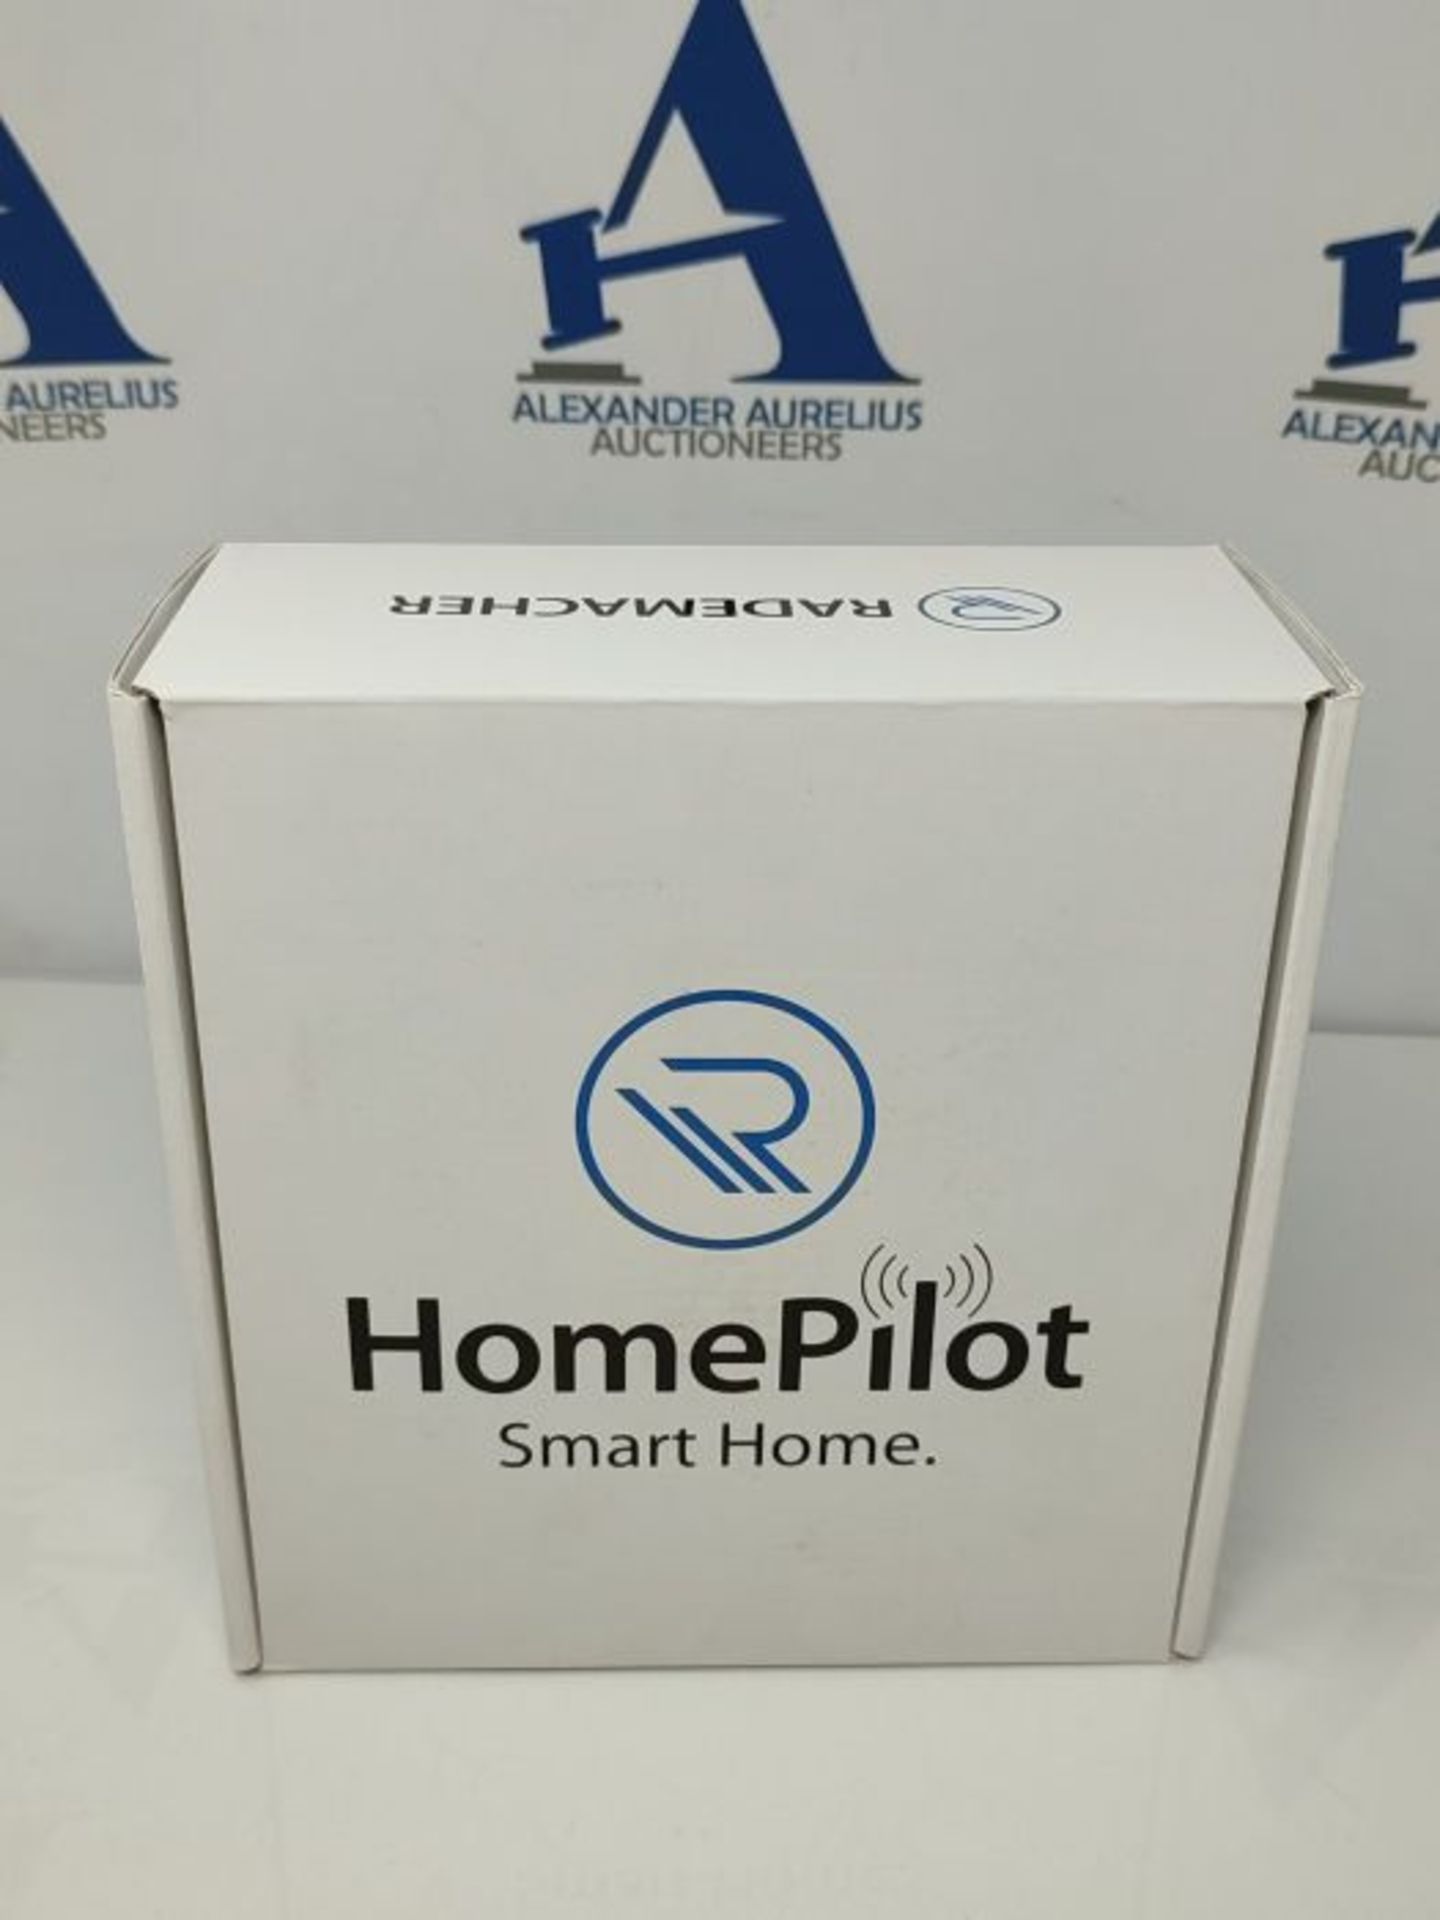 RRP £159.00 Rademacher HomePilot (3rd Generation) - The Heart of Your Smart Home, Control of DuoFe